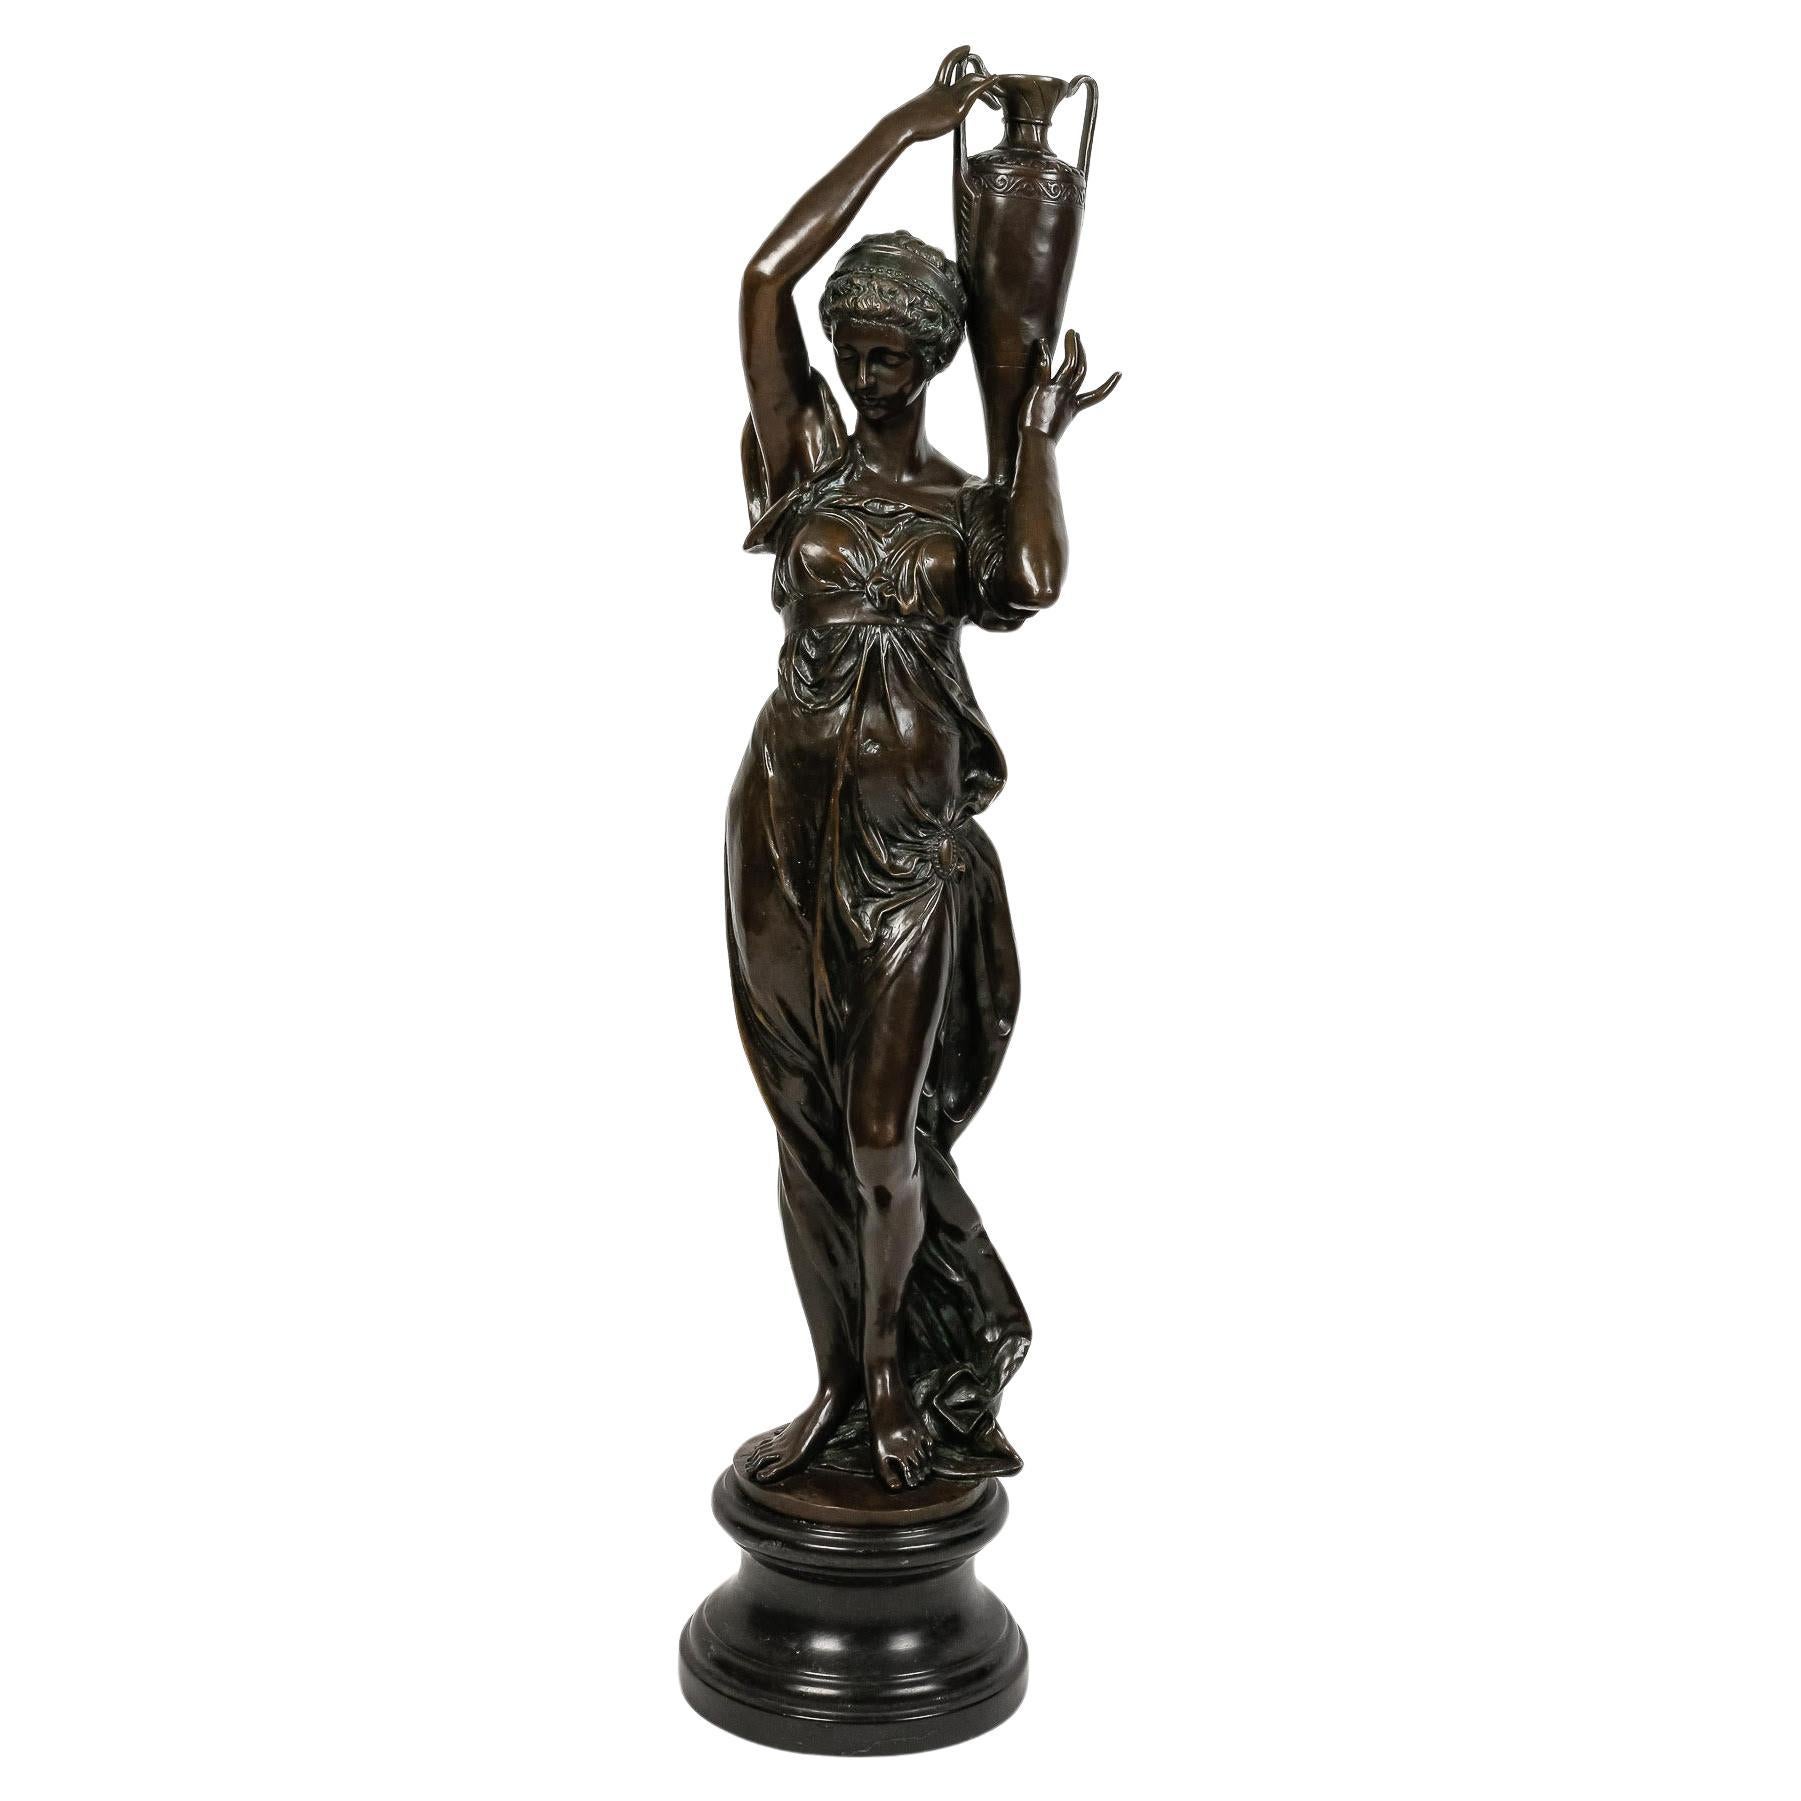 Large Bronze Sculpture by A.CARBIER from the 19th Century.